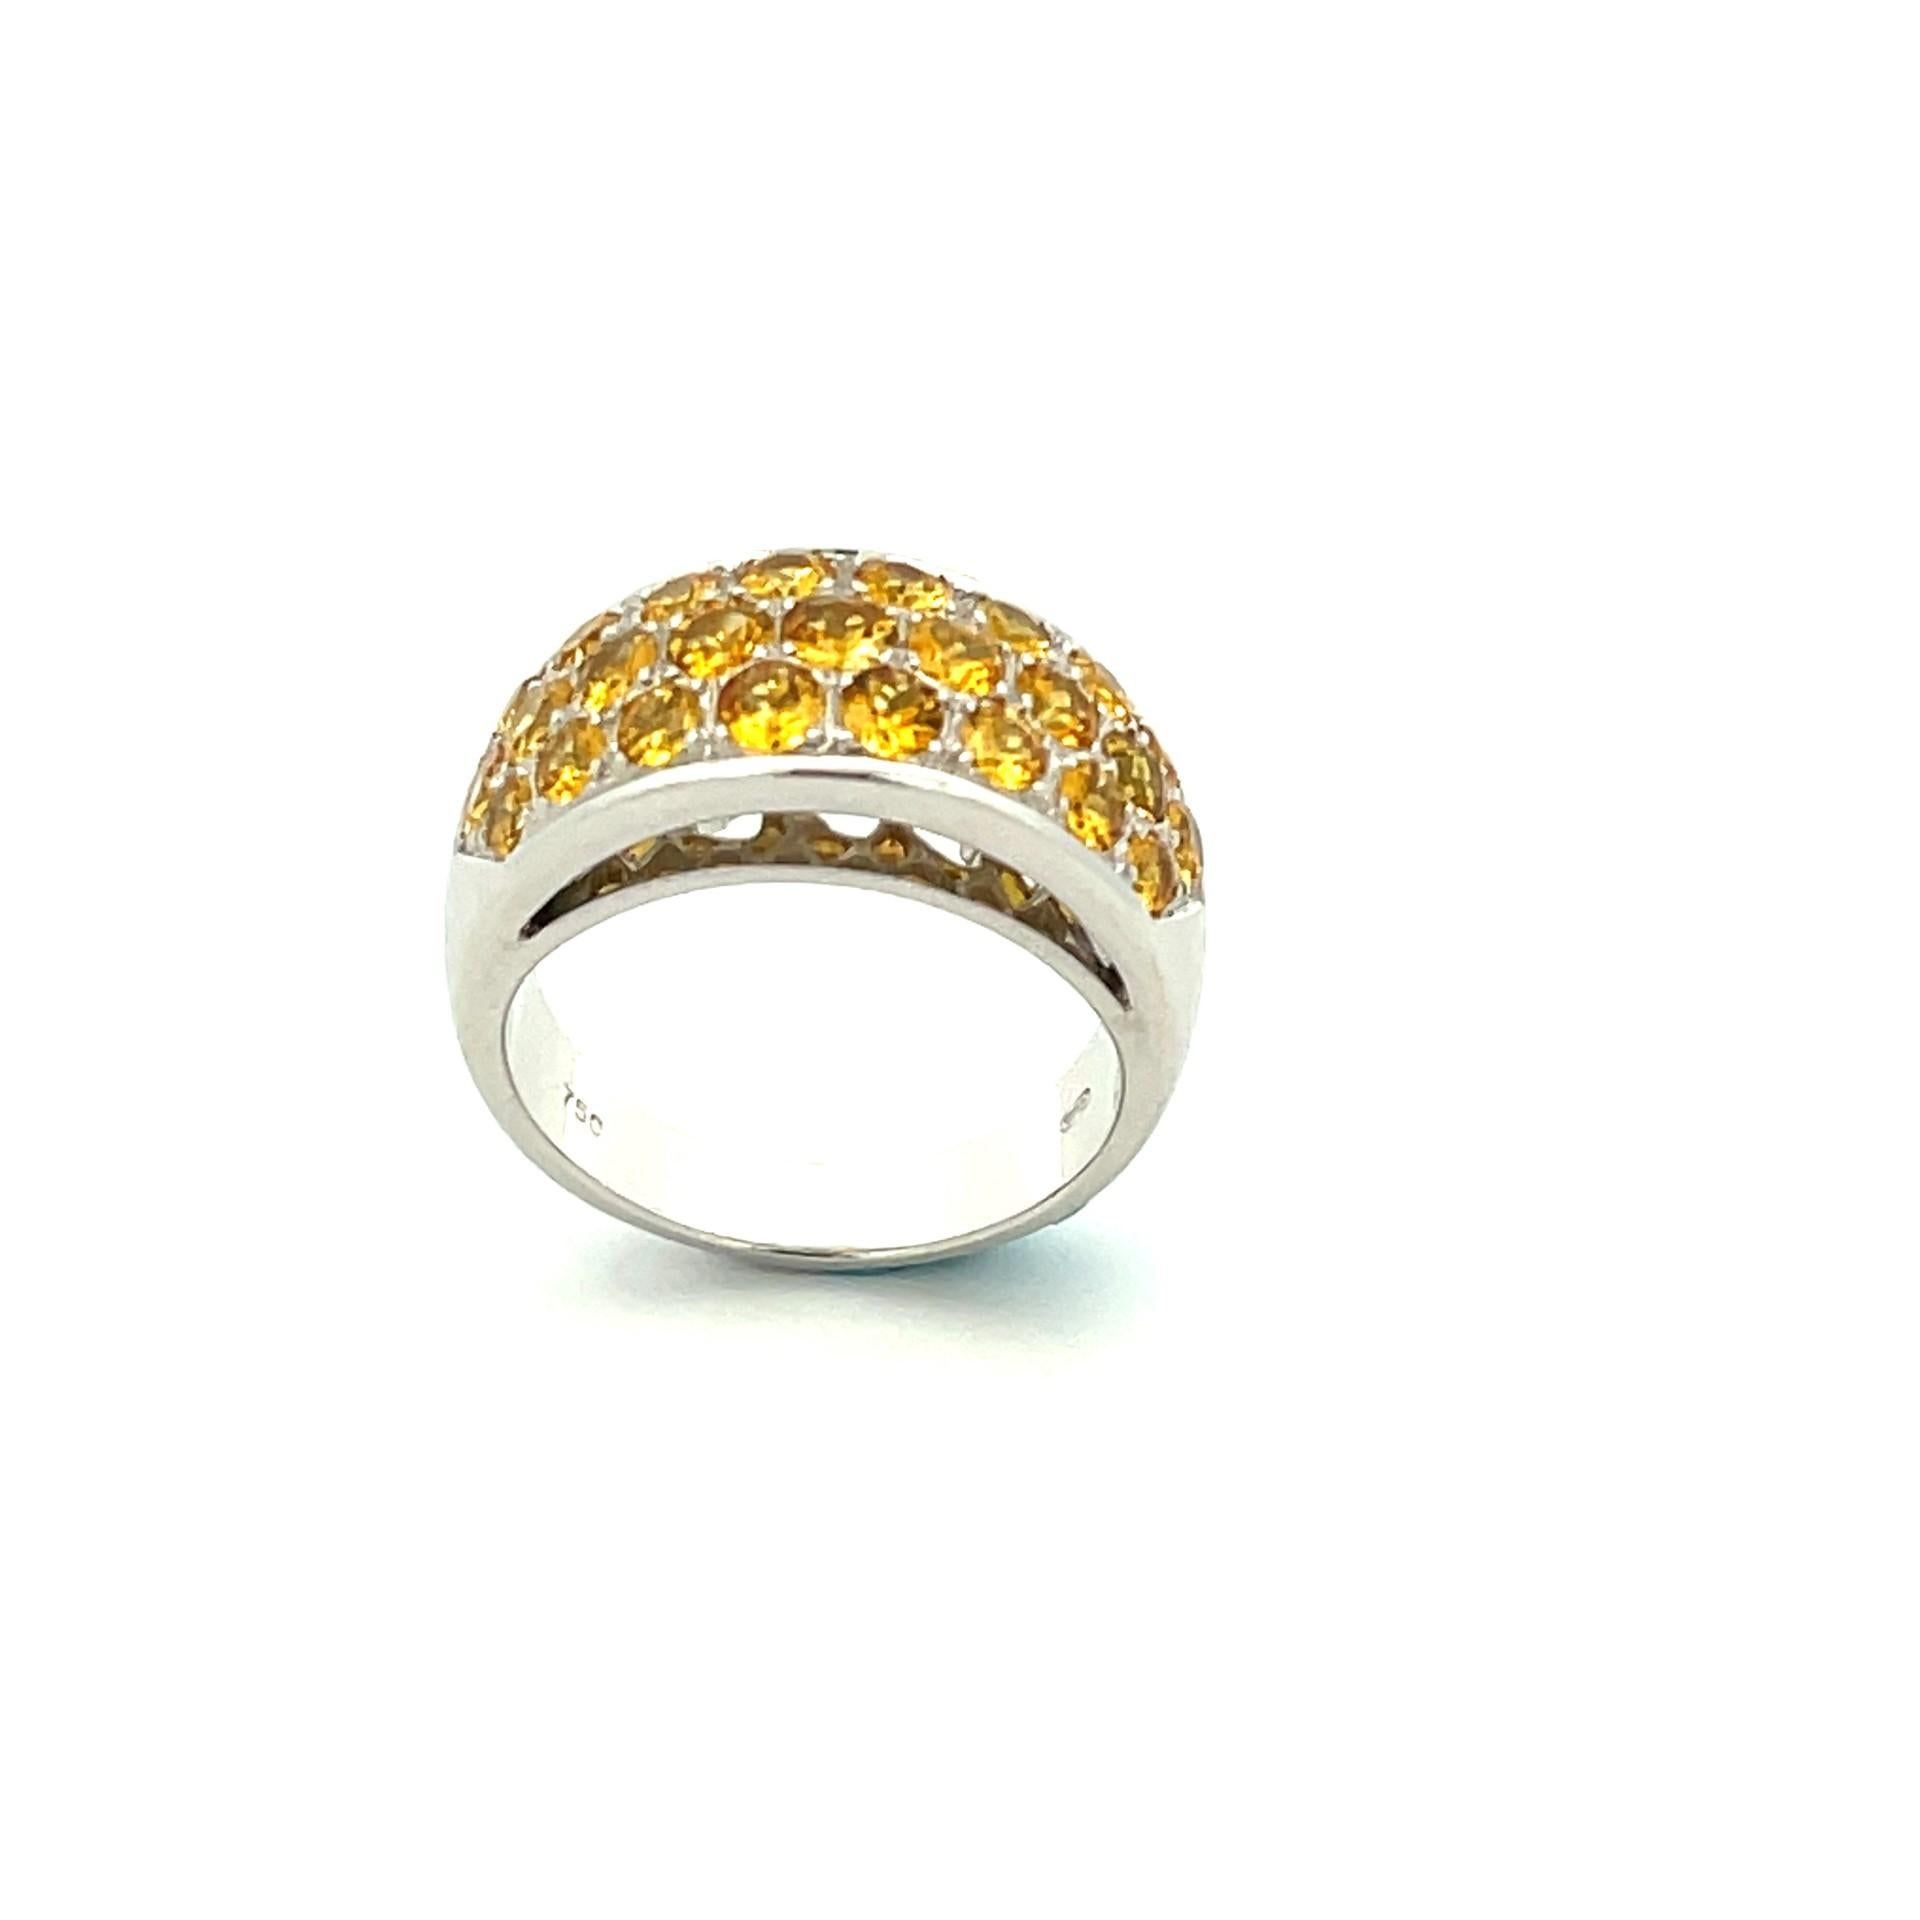 Yellow Sapphire are wonderfully set on a elegant and sparkling 18 karat white gold. Wear this pave ring as an anniversary ring or even as a right hand fashion ring.

25 natural yellow sapphires  2.70ct total weight

18kt white gold weighing 10.20